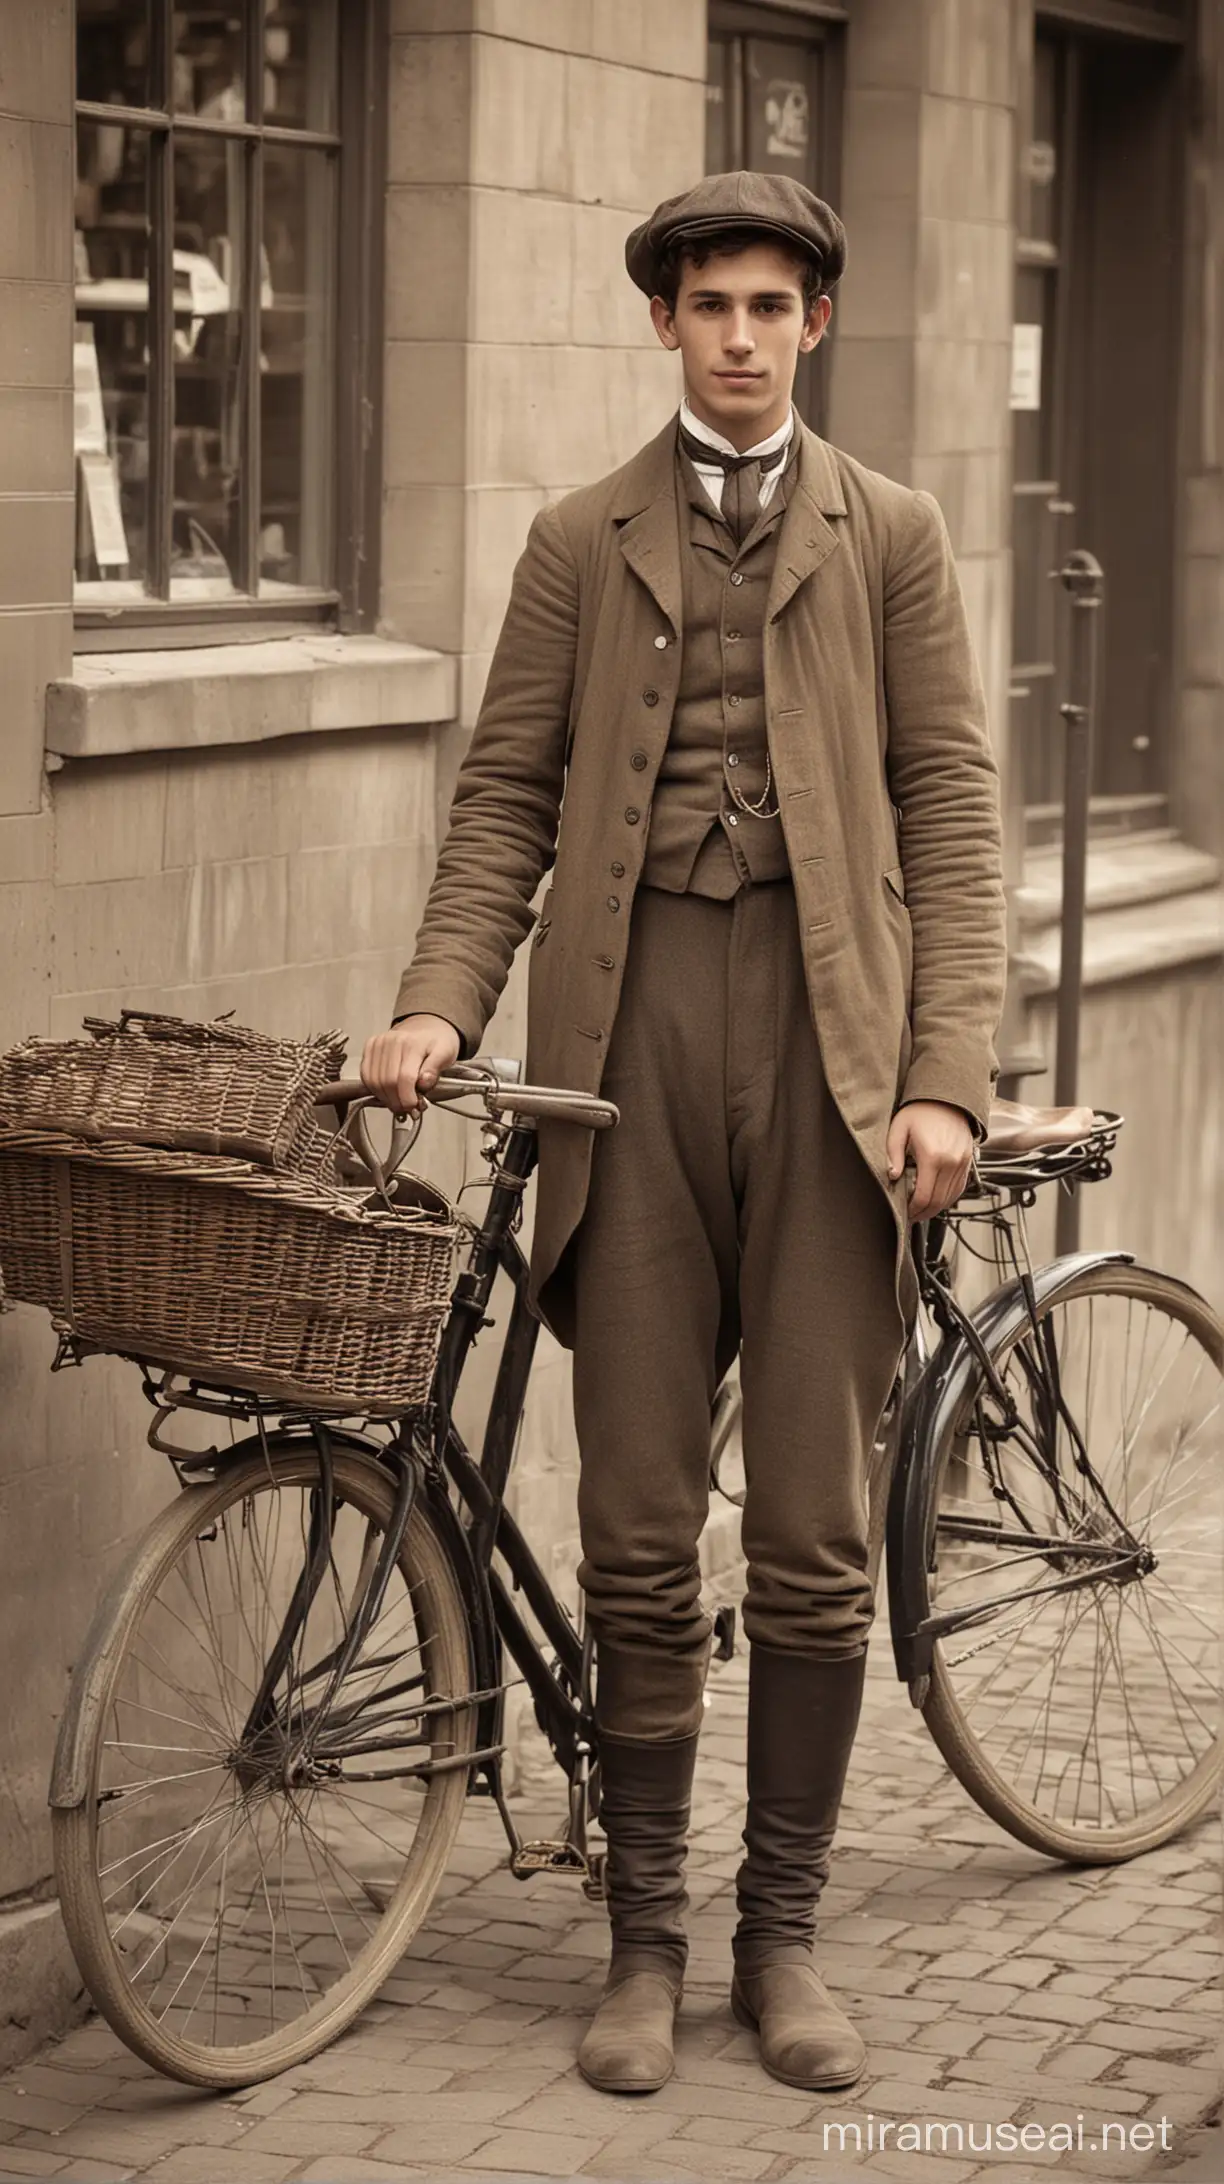 Victorian Bicycle Salesman Young Man Peddling Bicycles in 19th Century Setting